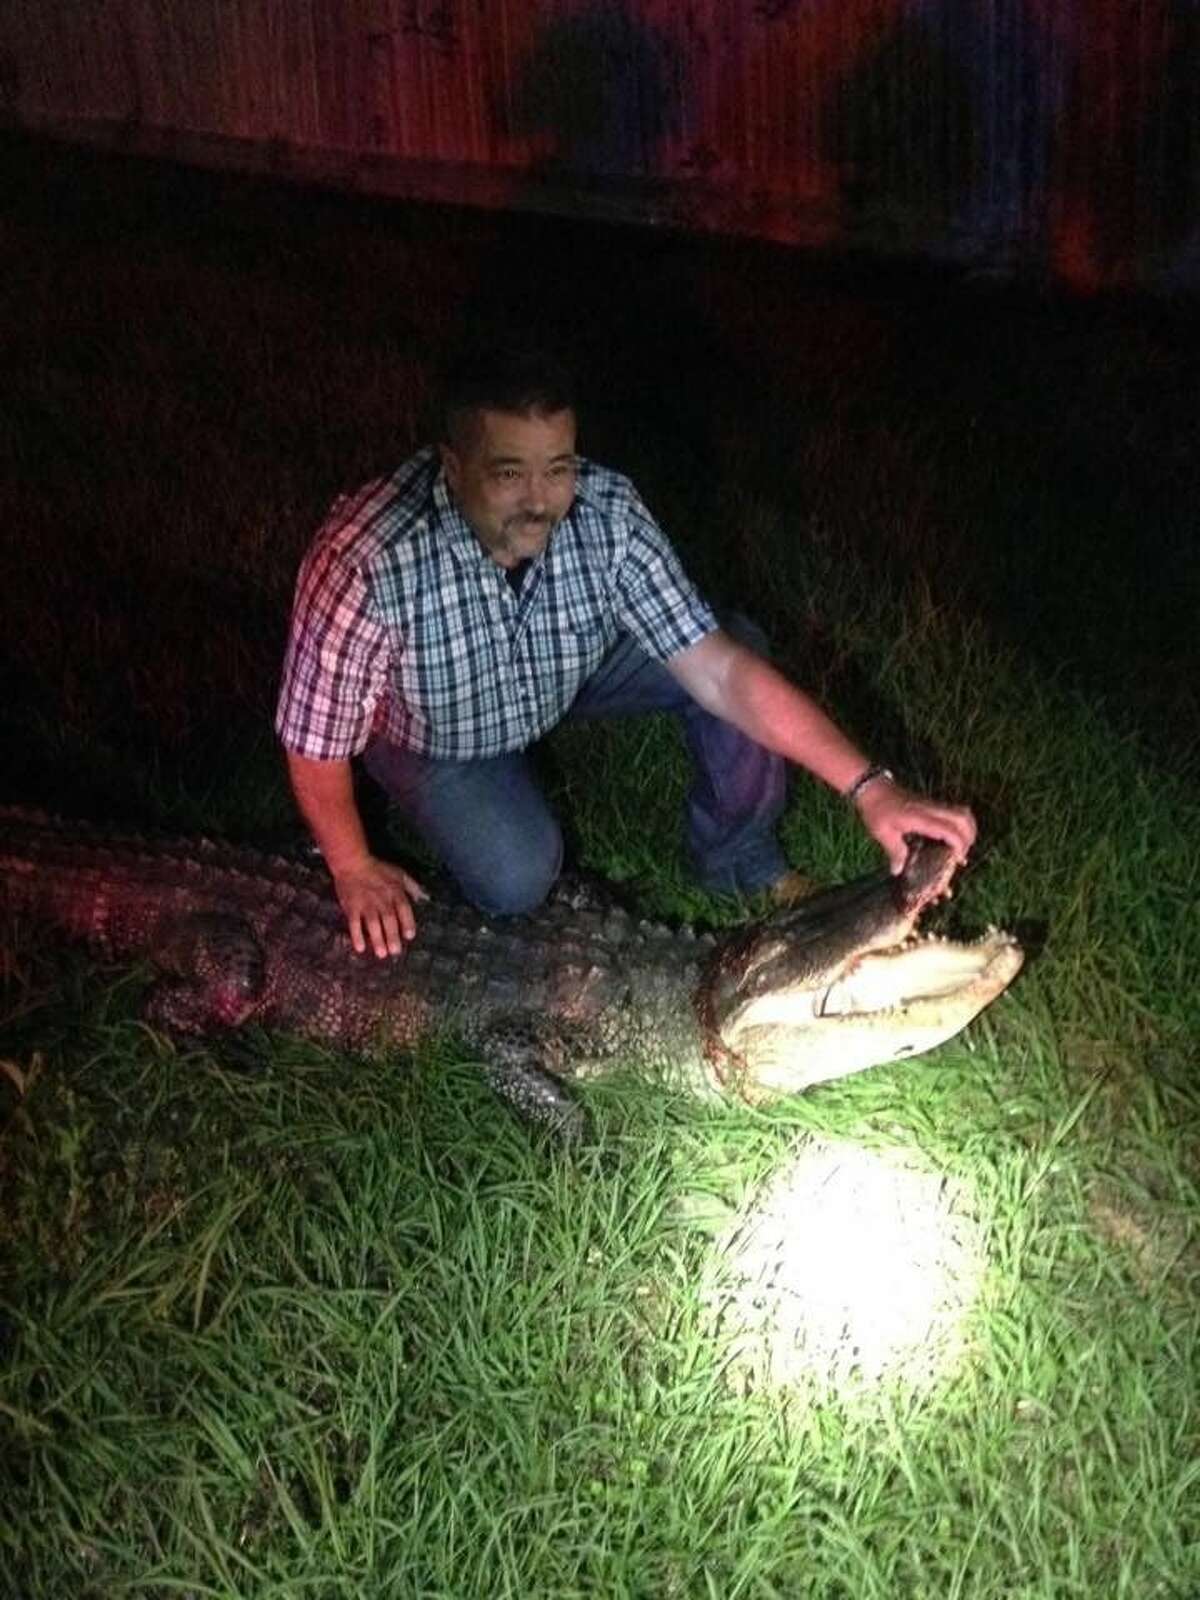 Pct. 5 Deputy Constable David Hunter removed a 10-foot alligator from US 90 in Liberty Wednesday night.